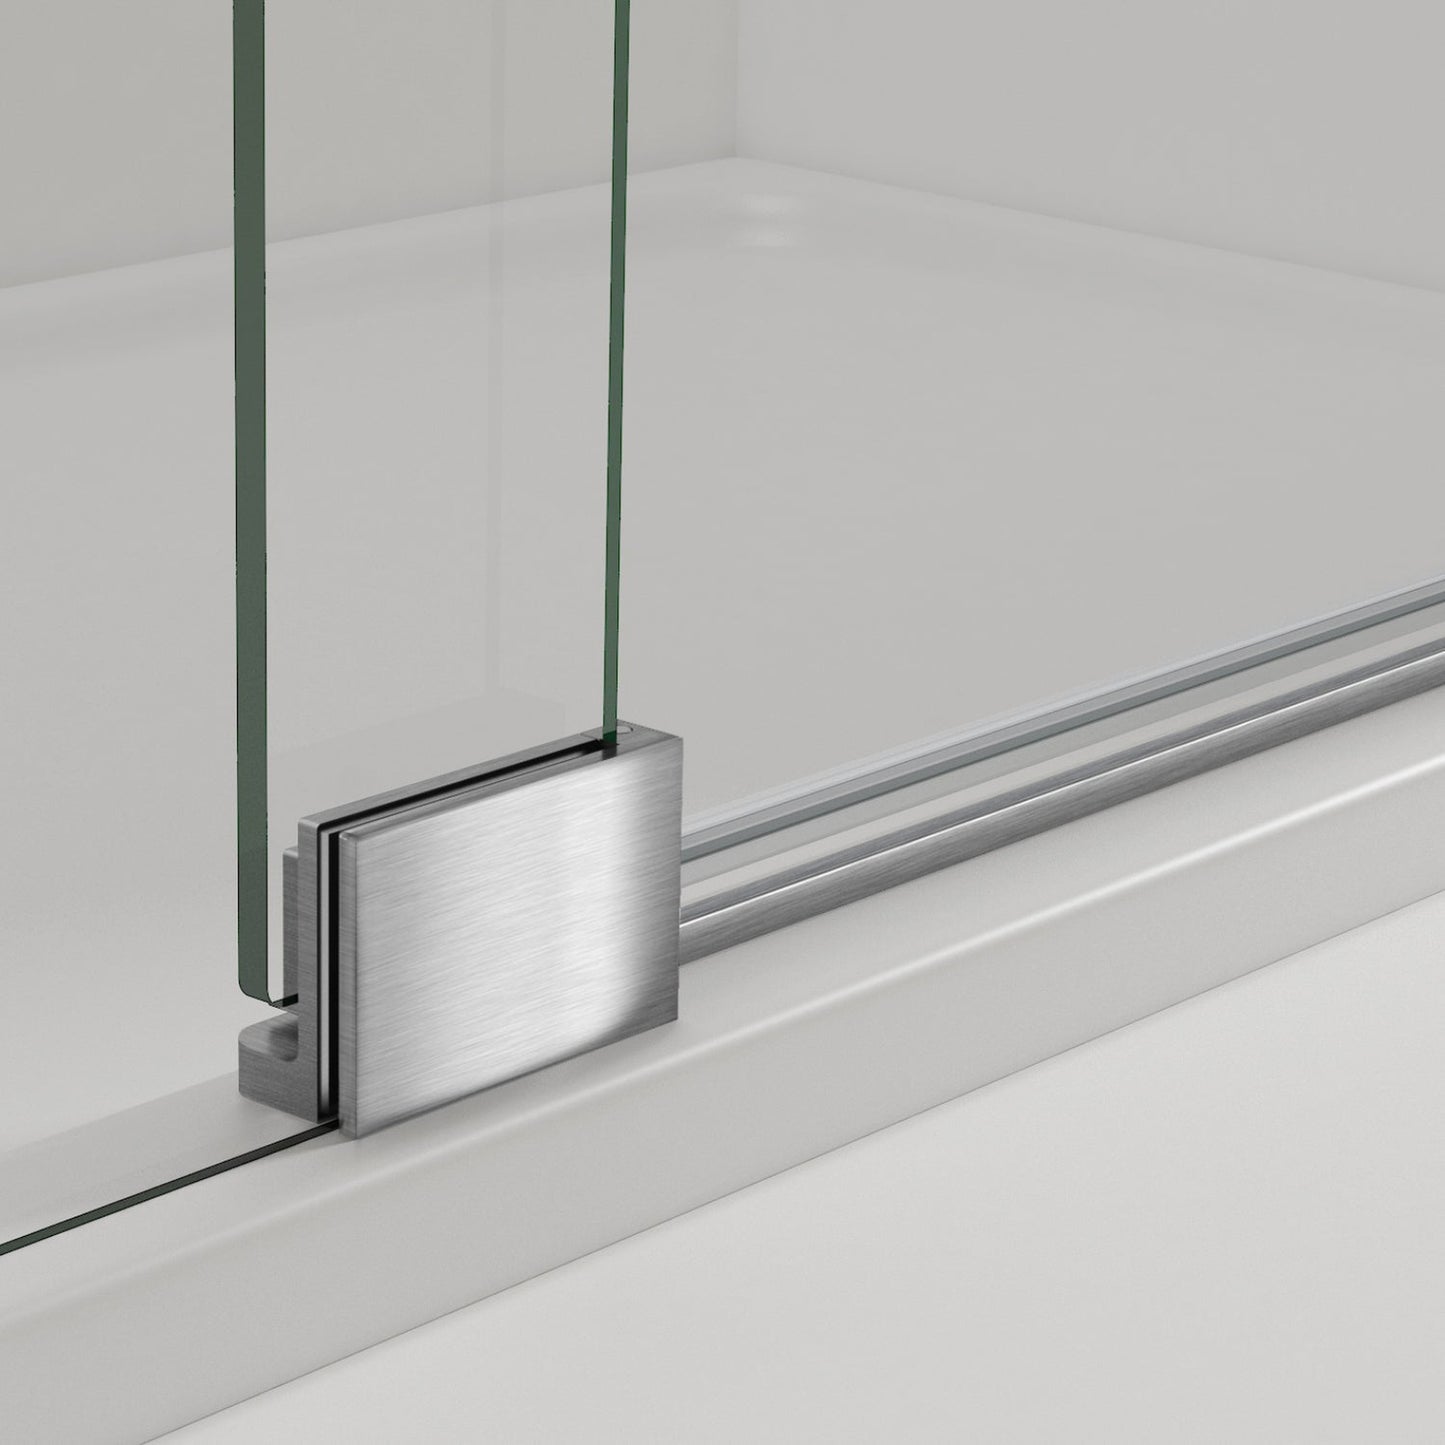 Vinnova Milano 48" x 72" Brushed Nickel In-line Hinged Frameless Shower Door With Fixed Glass on Both Sides